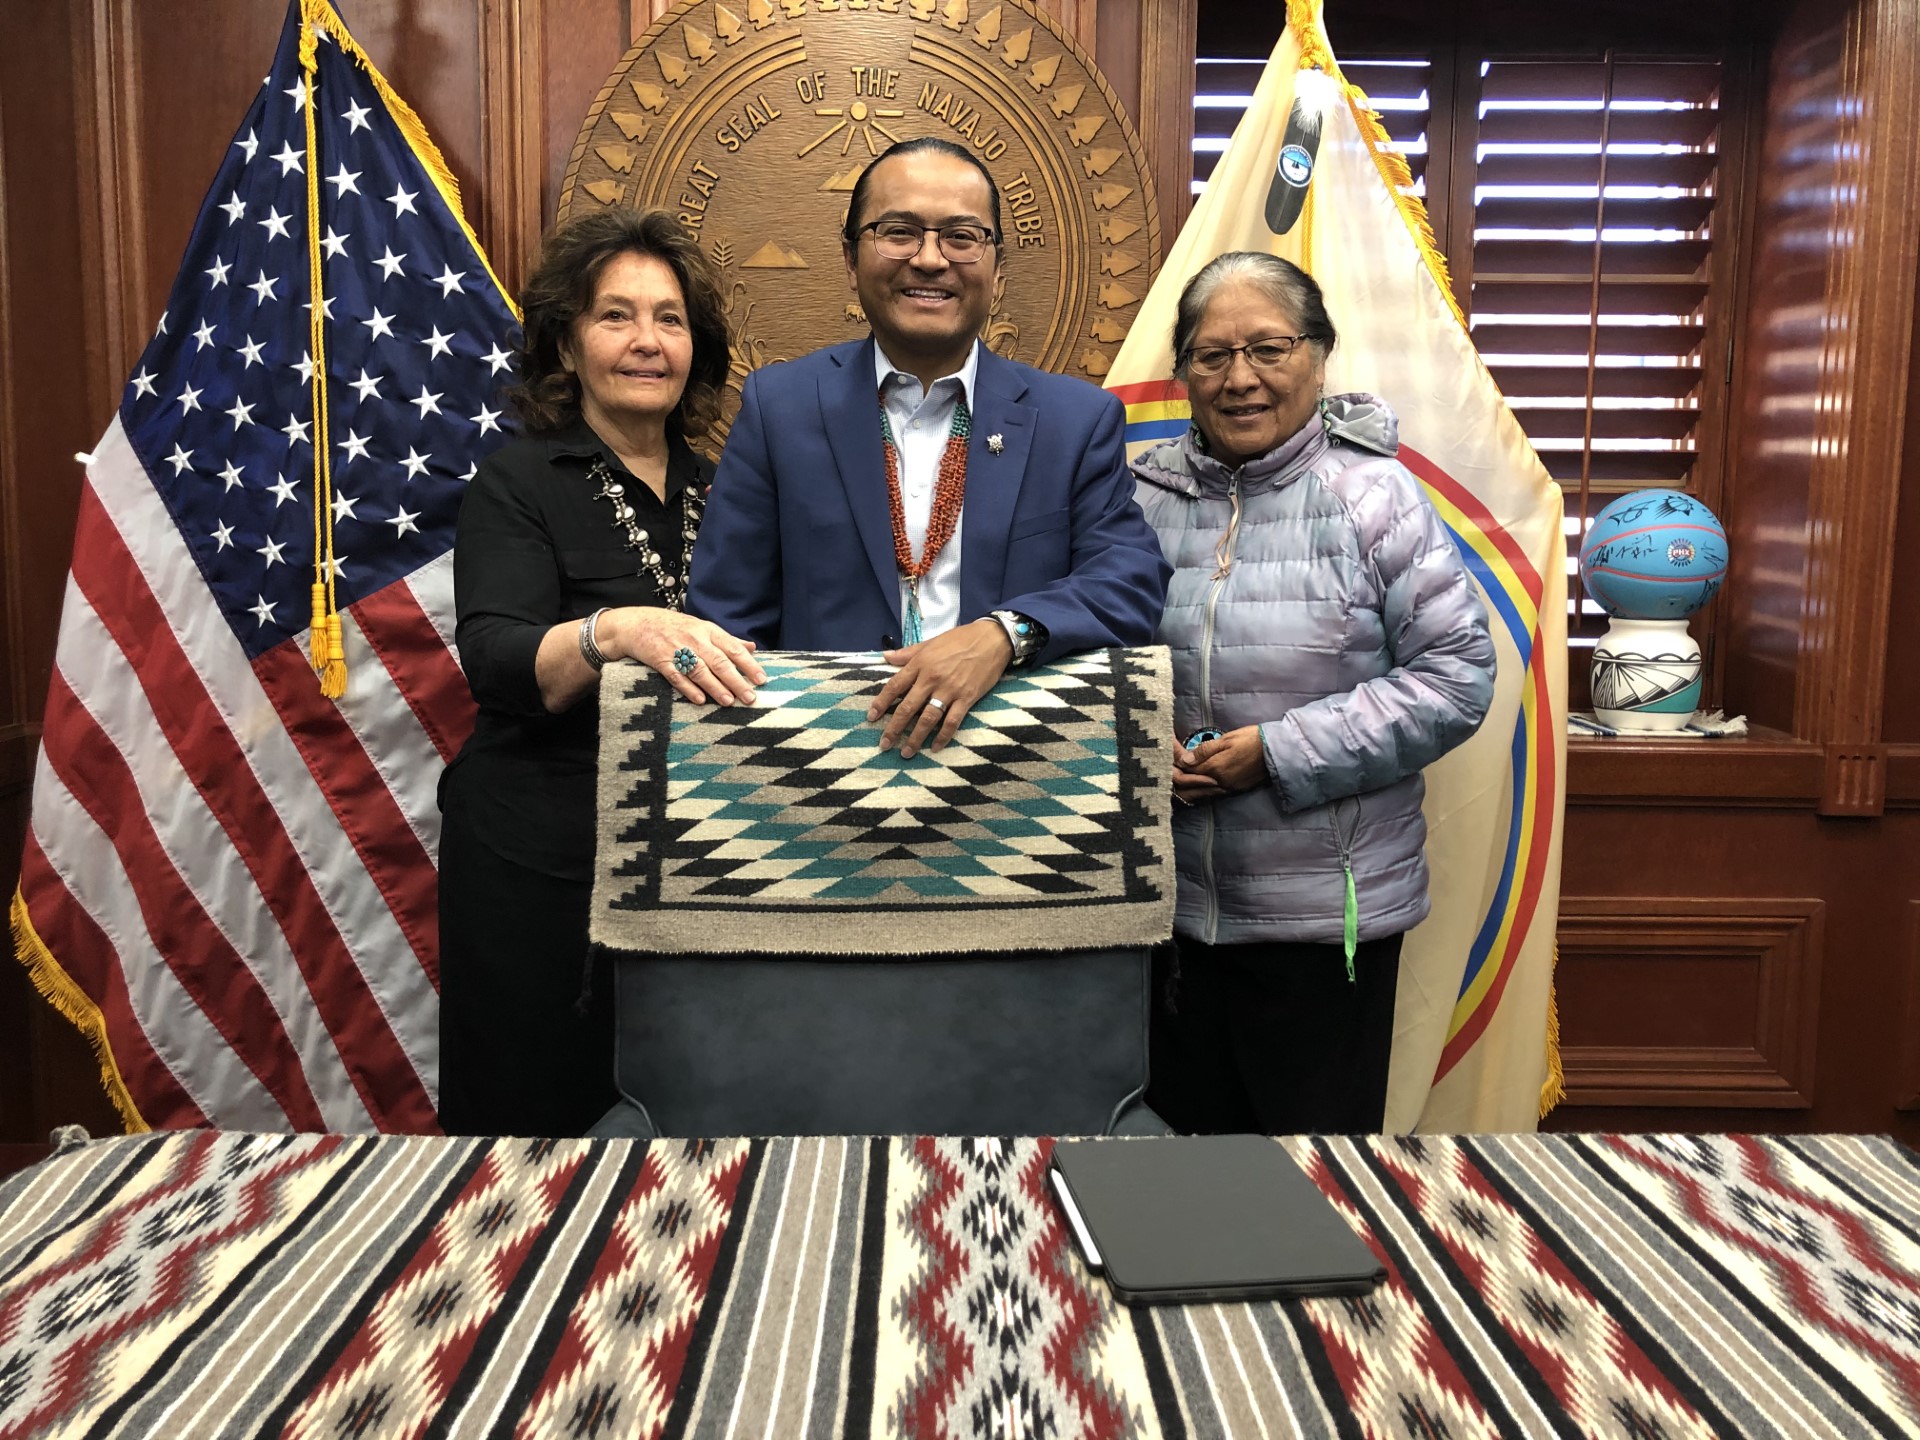 The meeting concluded with Barbara and the head of the Navajo Nation Scholarship Office, Rose Graham, updating President Nygren on the range of research projects that Navajo educators and leaders are doing as part of their EdD studies at Fielding.